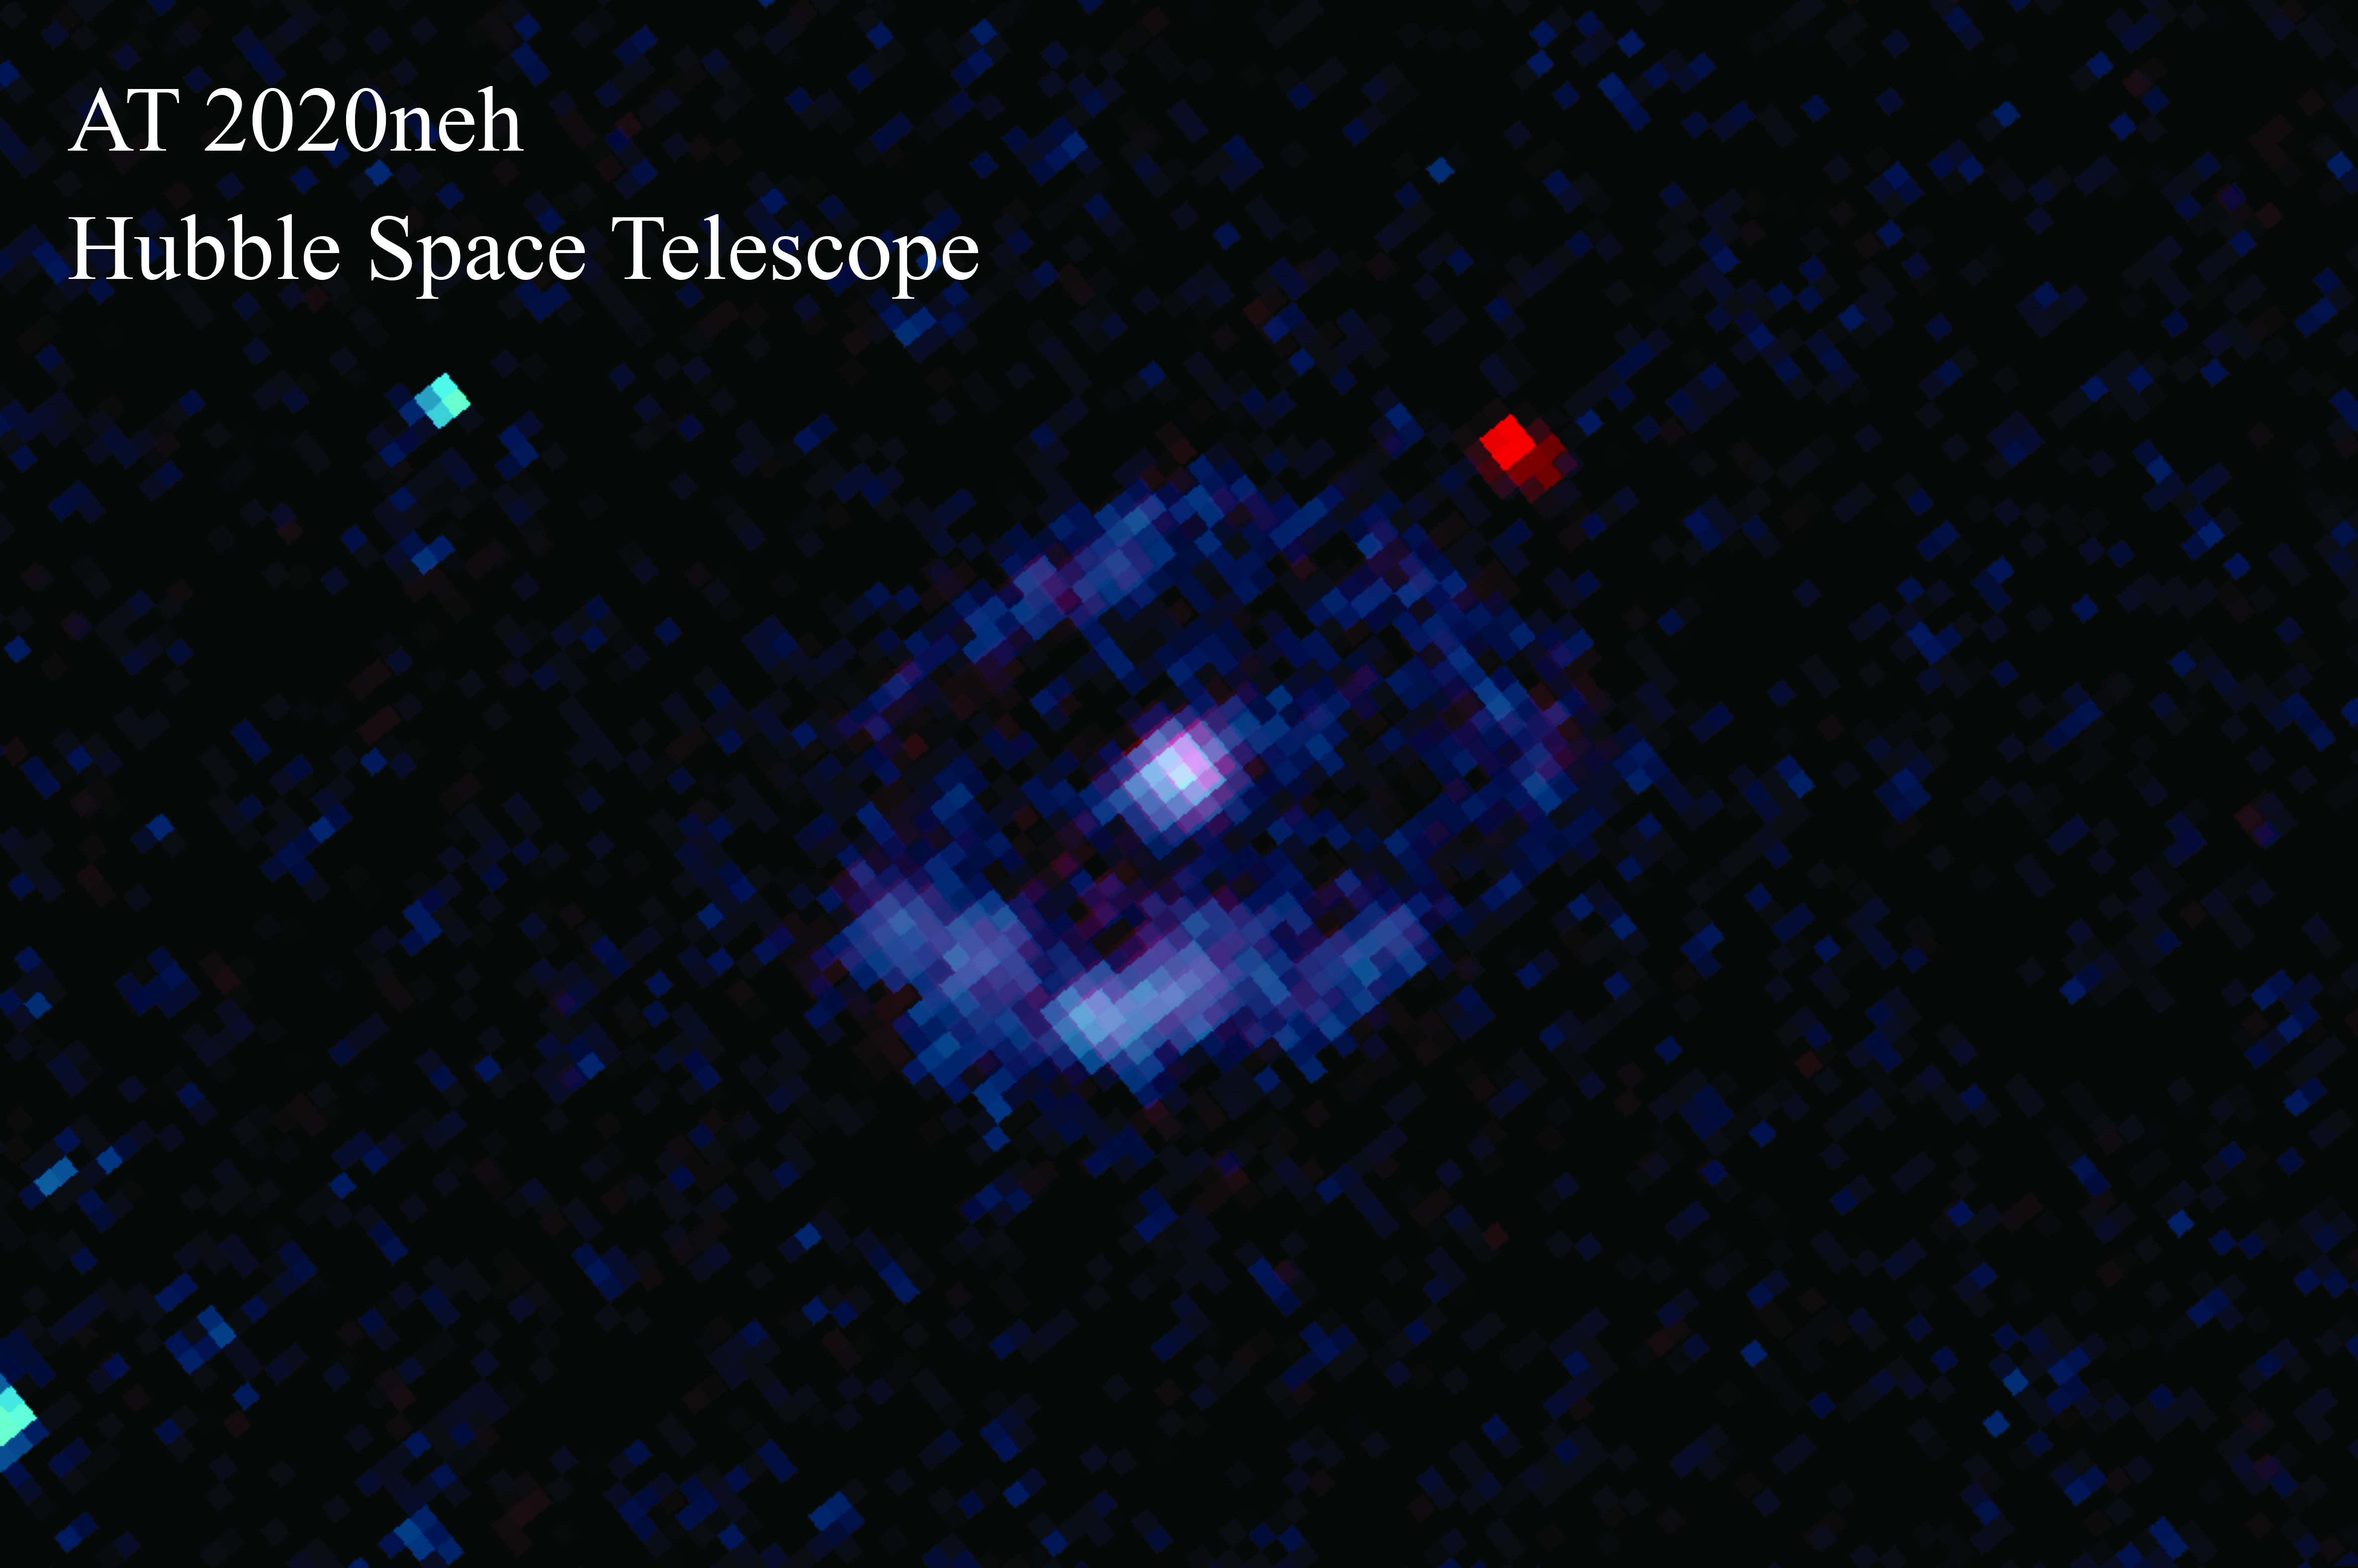 Astronomers discovered a star being ripped apart by a black hole in the galaxy SDSS J152120.07+140410.5, 850 million light years away. Researchers pointed NASA’s Hubble Space Telescope to examine the aftermath, called AT 2020neh, which is shown in the center of the image. Hubble’s ultraviolet camera saw a ring of stars being formed around the nucleus of the galaxy where AT 2020neh is located.